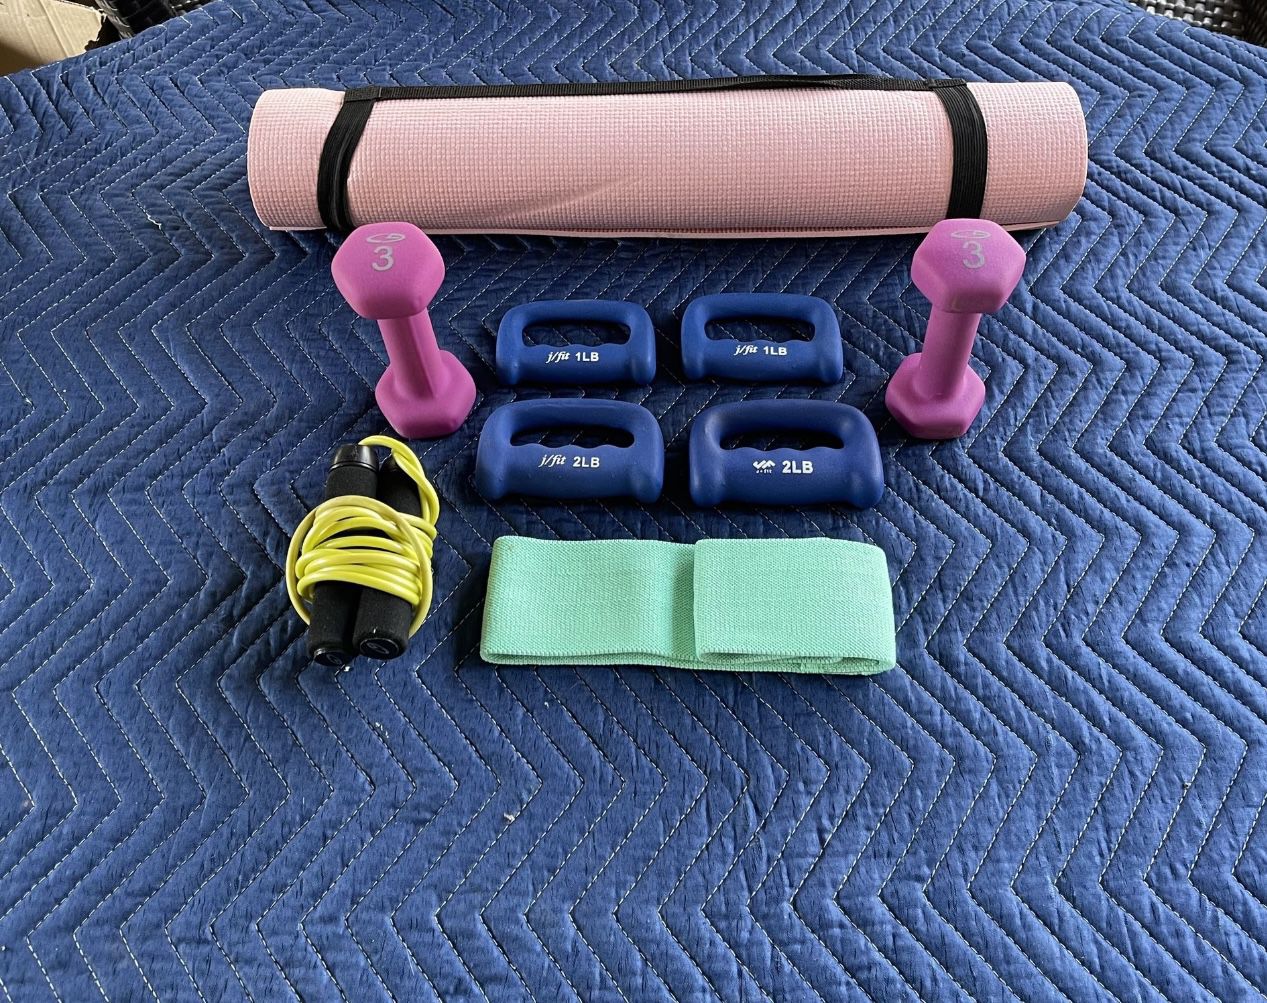 Yoga Mat 1 / 2 & 3 Pound Dumbbell Sets, Booty Band And Jump Rope All Like New